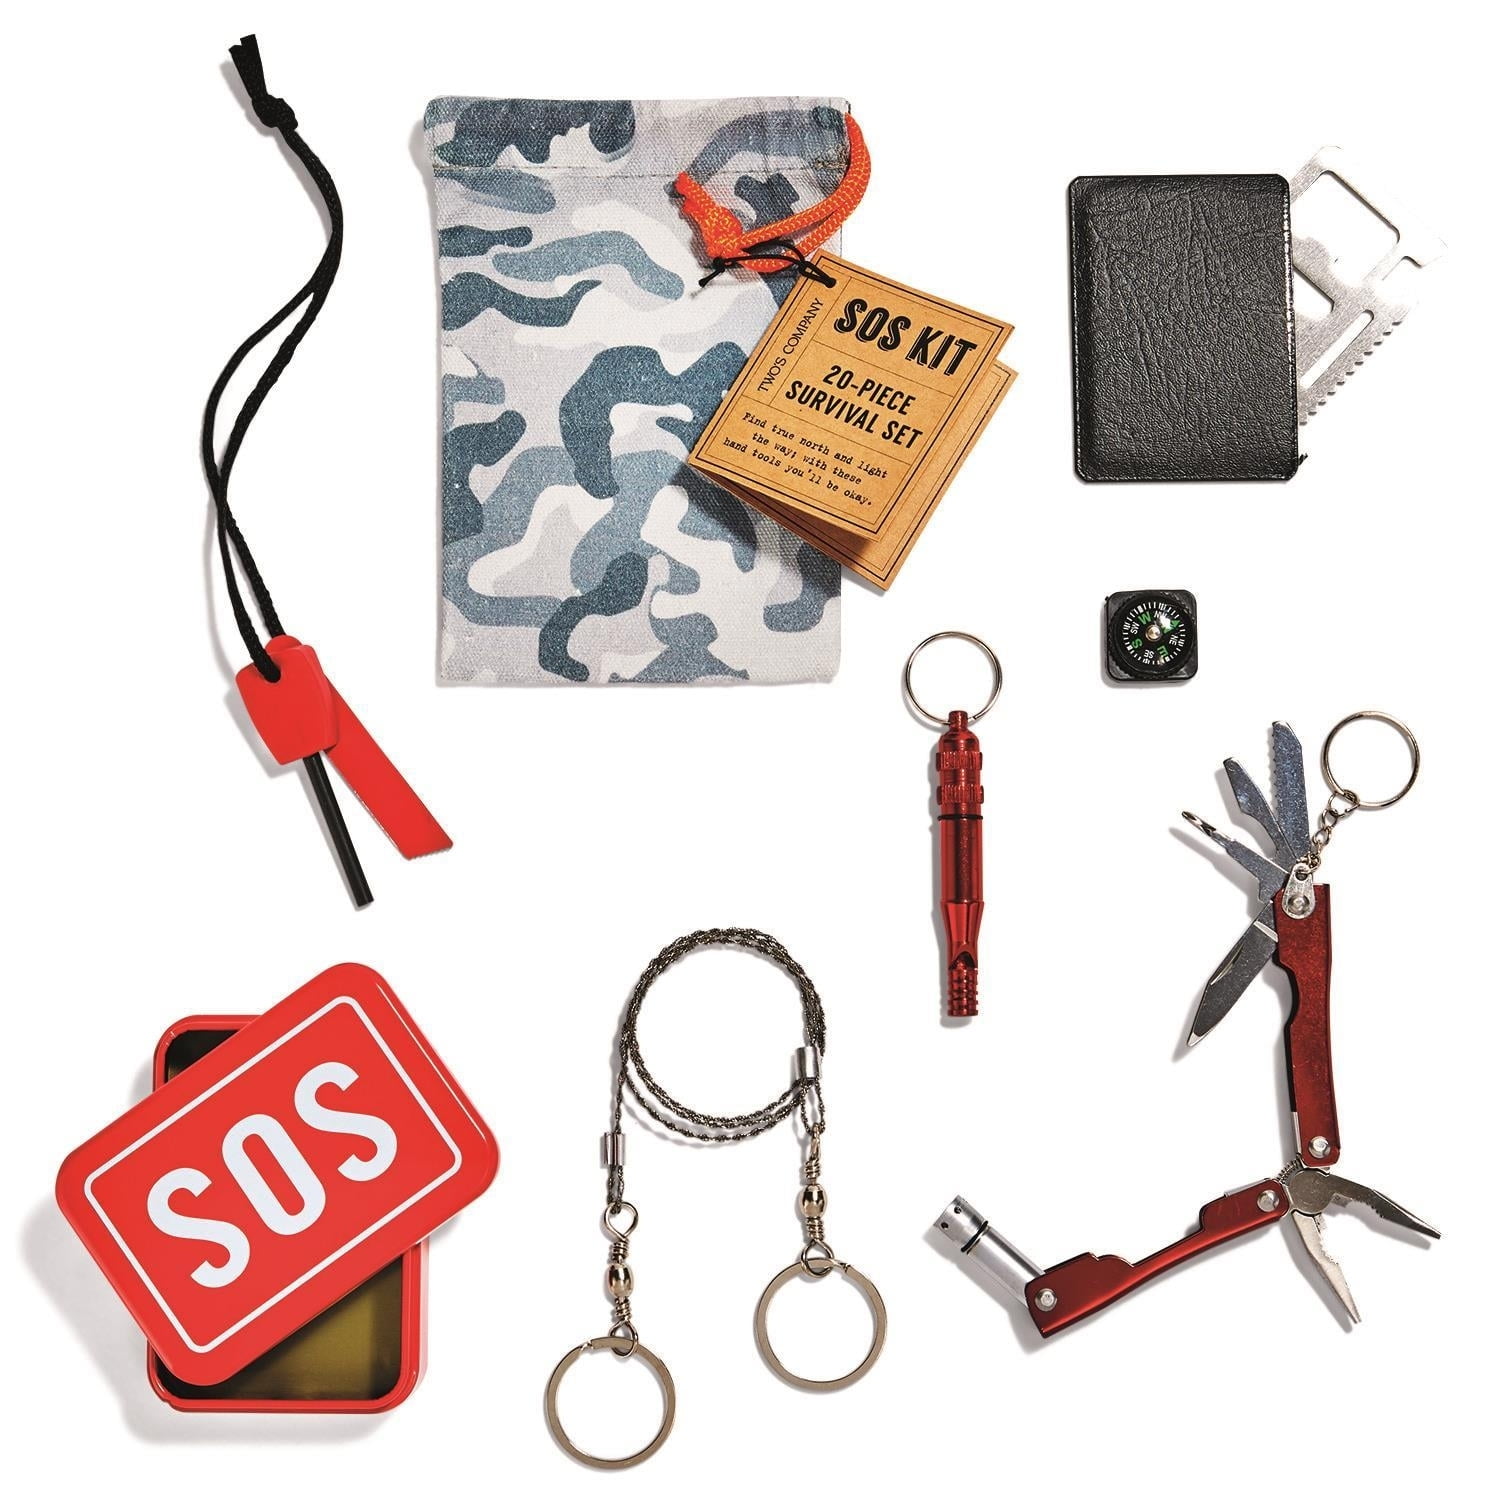 Eco-Fused 2X Survival Whistle and 2X Signal Mirror - Outdoor Survival Kit  Rescue Flash Mirror - Clip-on Whistle with Lanyard - Backpacking, Camping